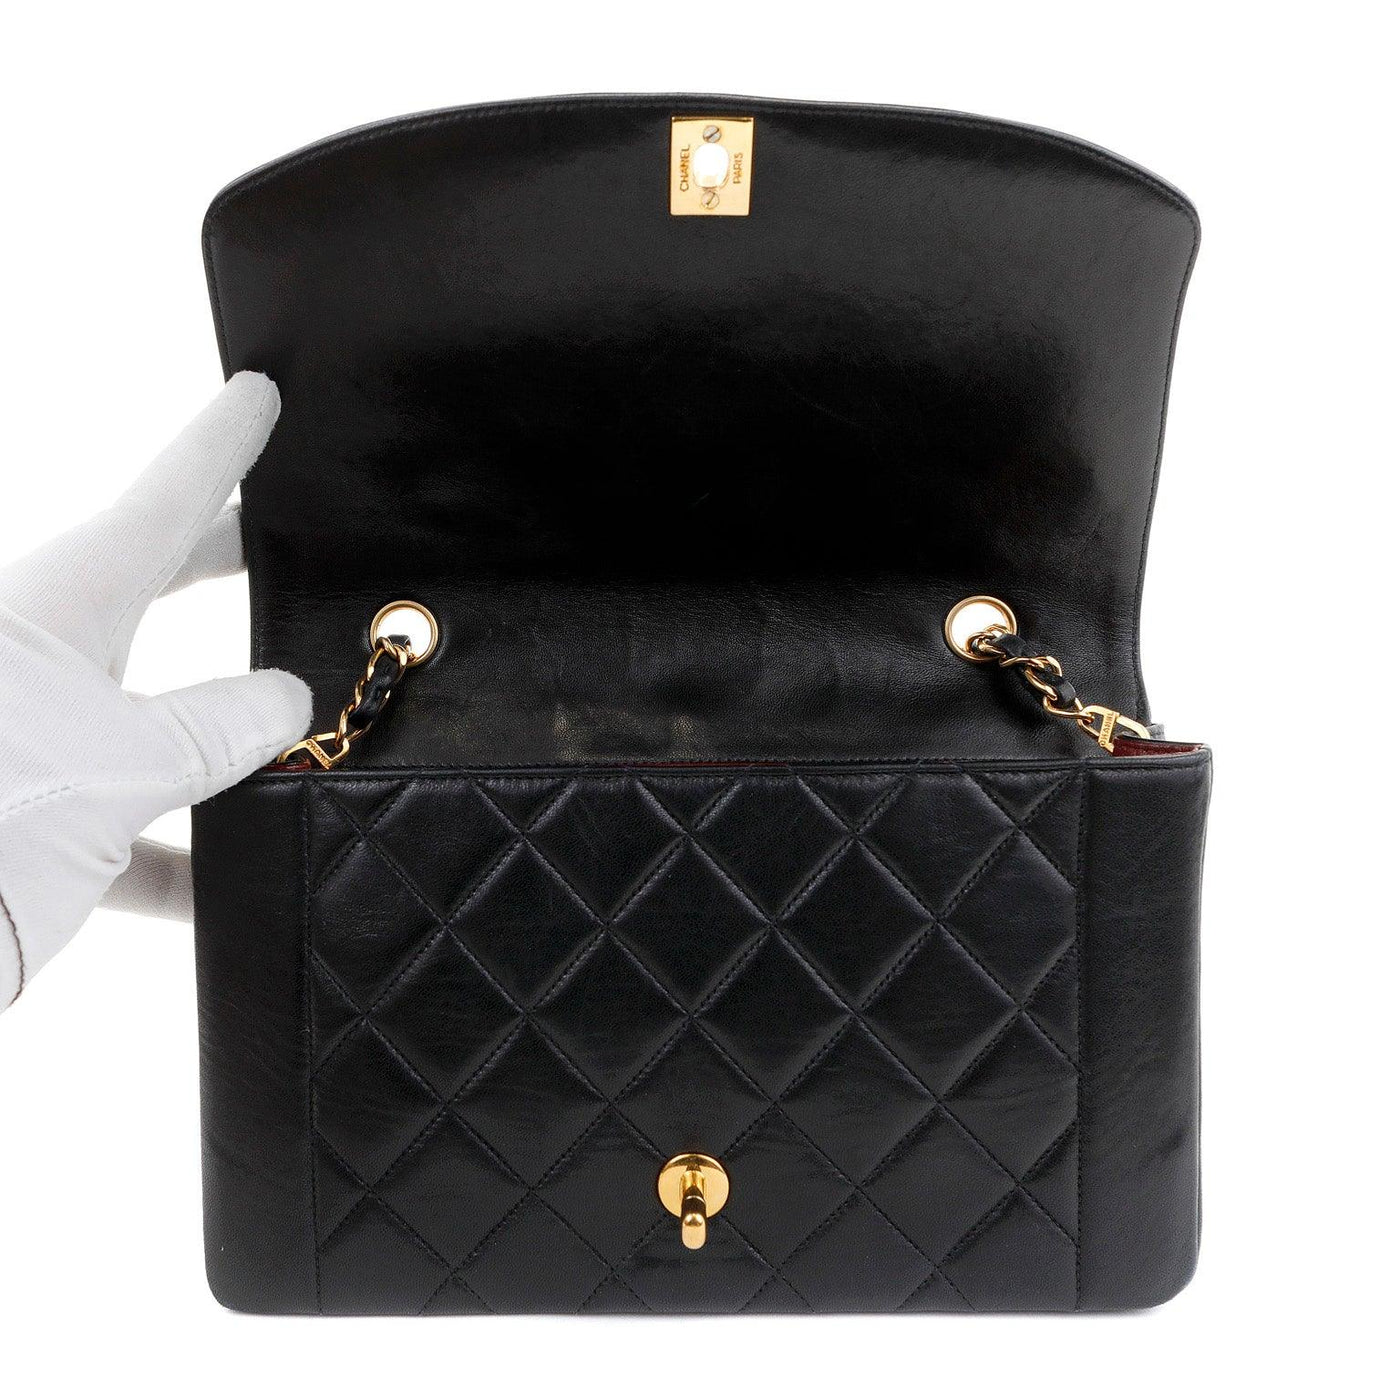 Chanel Black Lambskin Medium Princess Diana Classic with Gold Hardware - Only Authentics